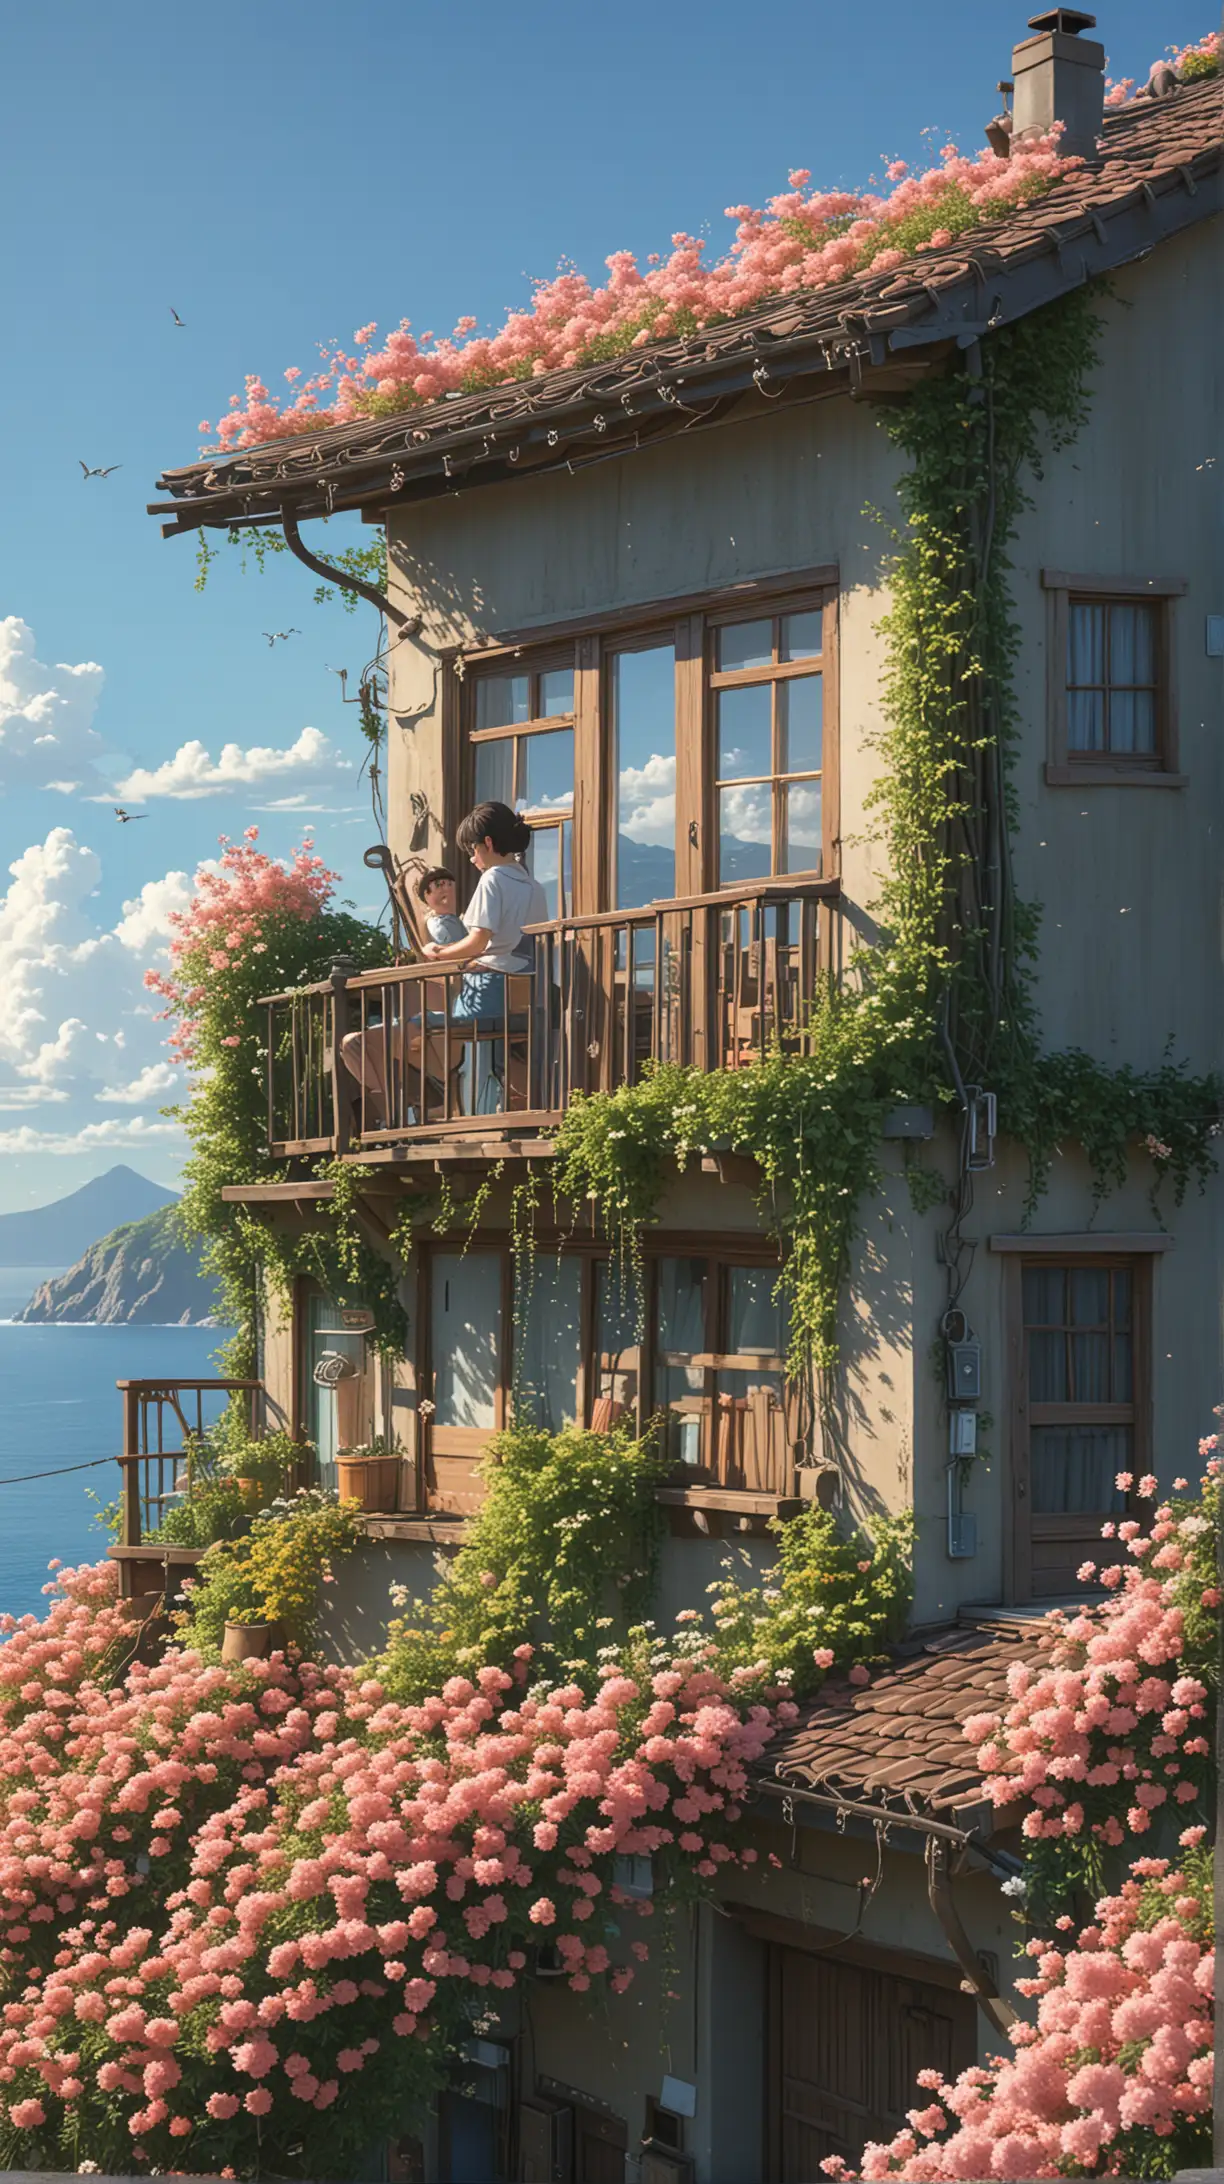 Tiny Arriety Viewing Sea from Roof Amidst Vines and Flowers